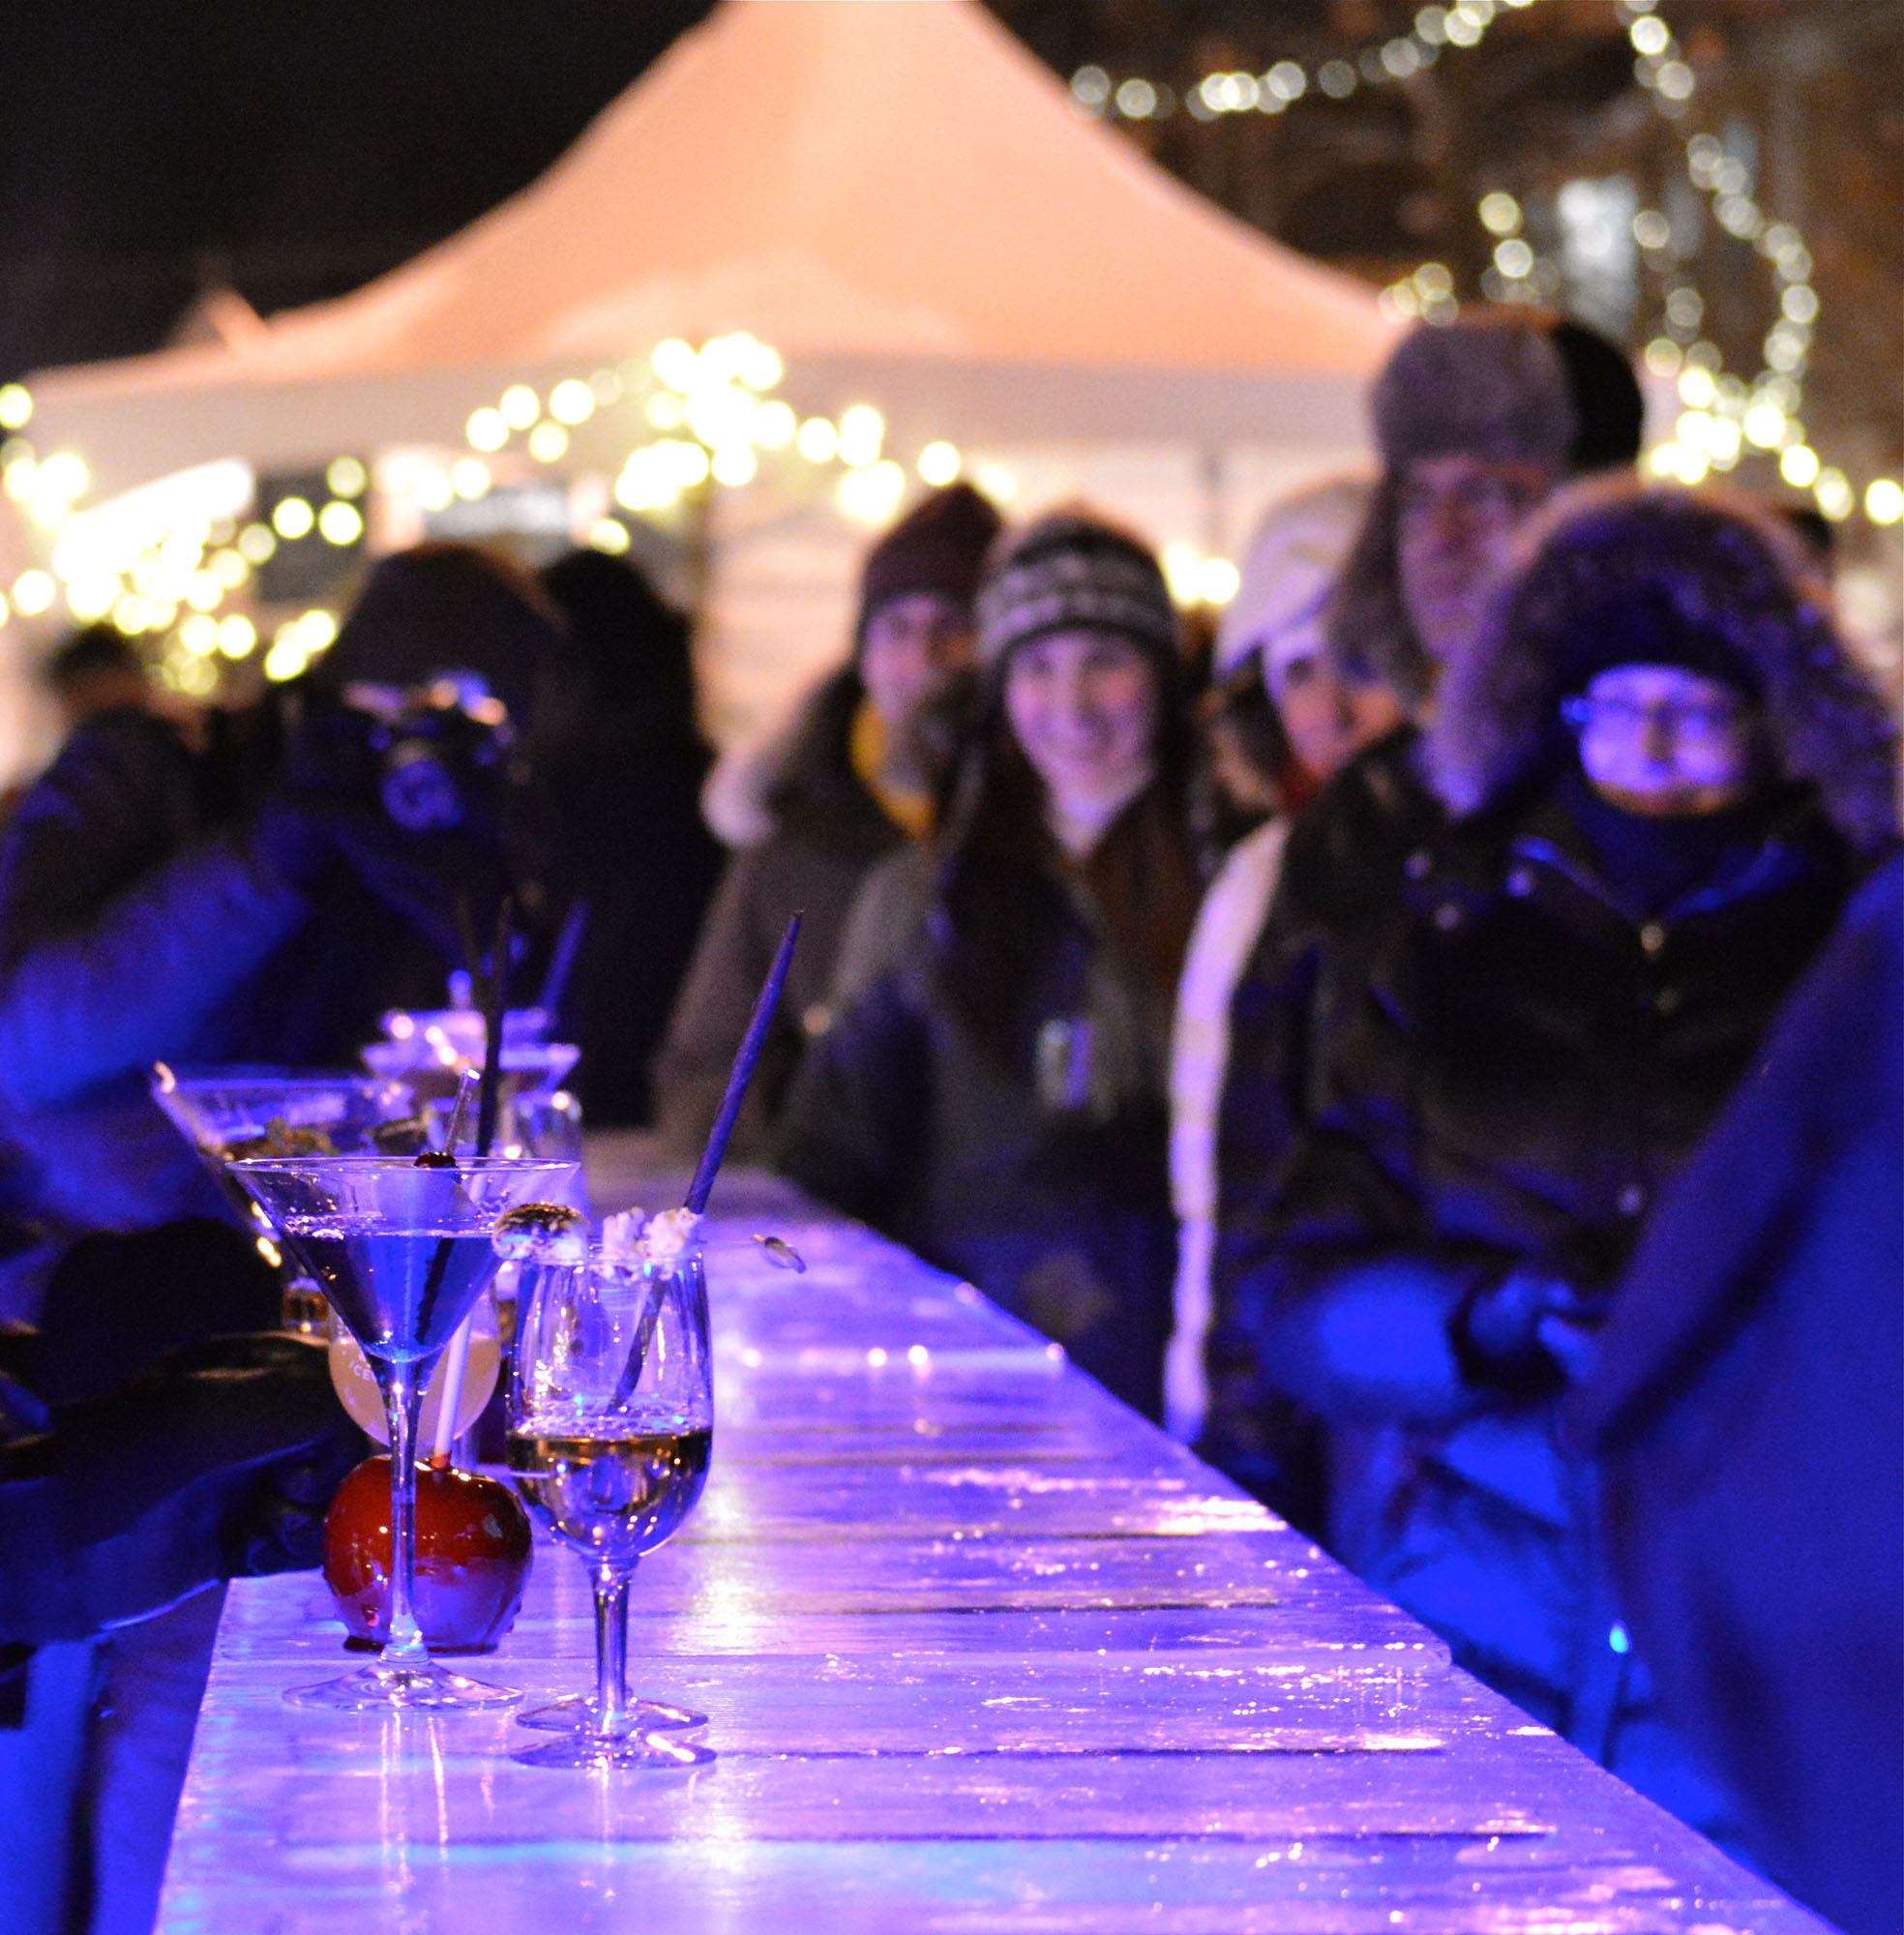 WINE COUNTRY ONTARIO - Icewine Festival transforms Wine Country